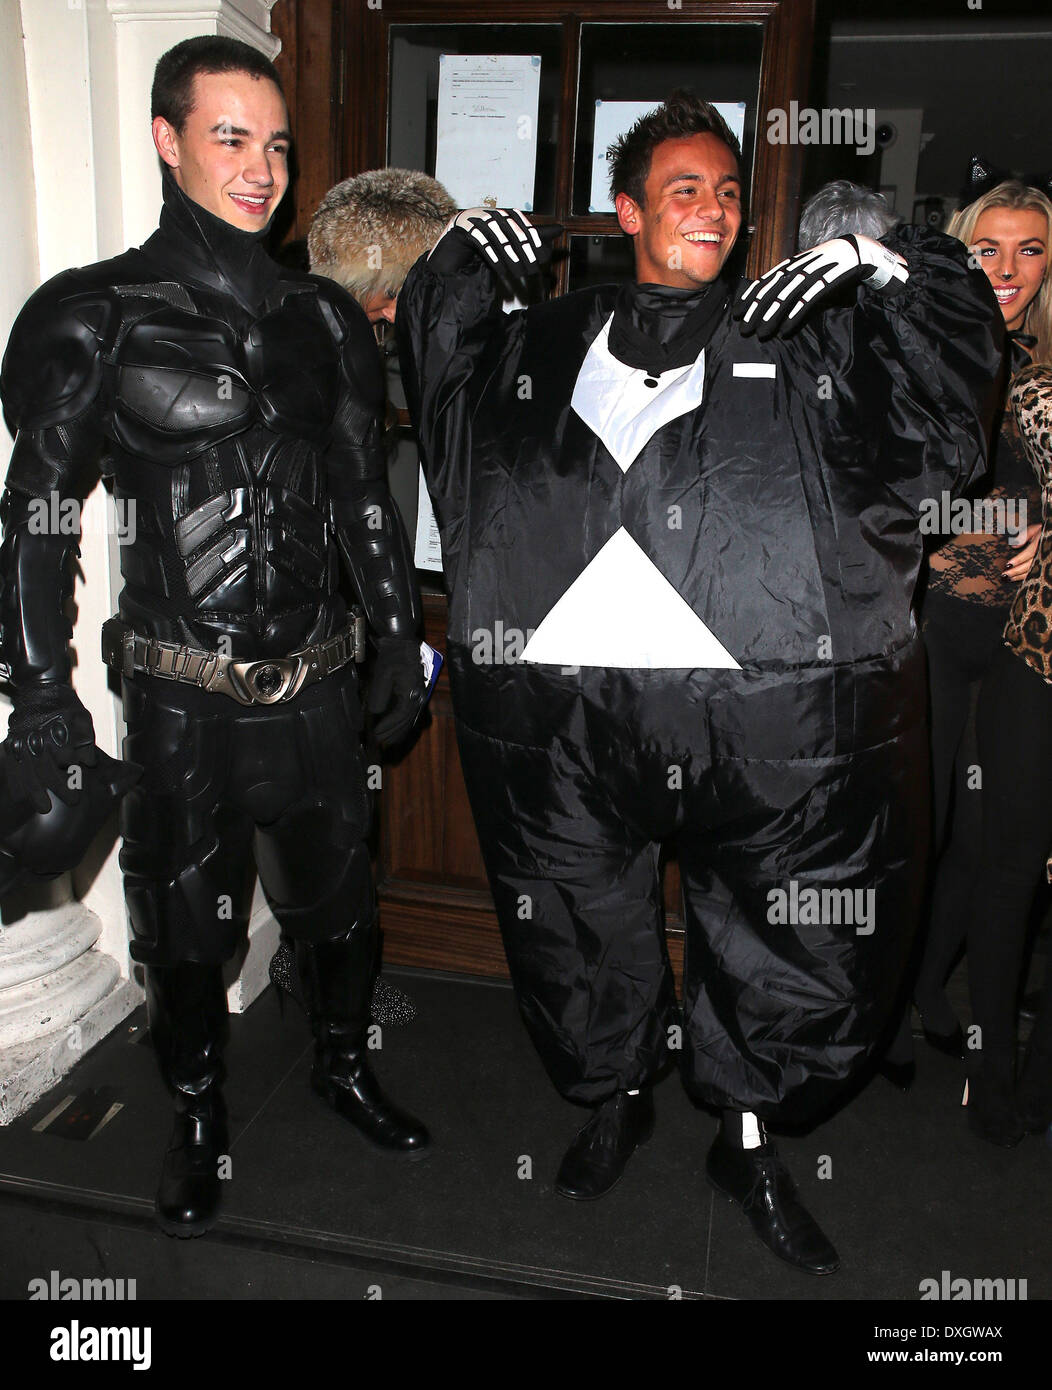 Liam Payne of One Direction dressed as Batman and Tom Daley in a fat  skeleton costume Celebrities at Funky Buddha nightclub for a Halloween  party London, England - 28.10.12 Where: London, LONDON,